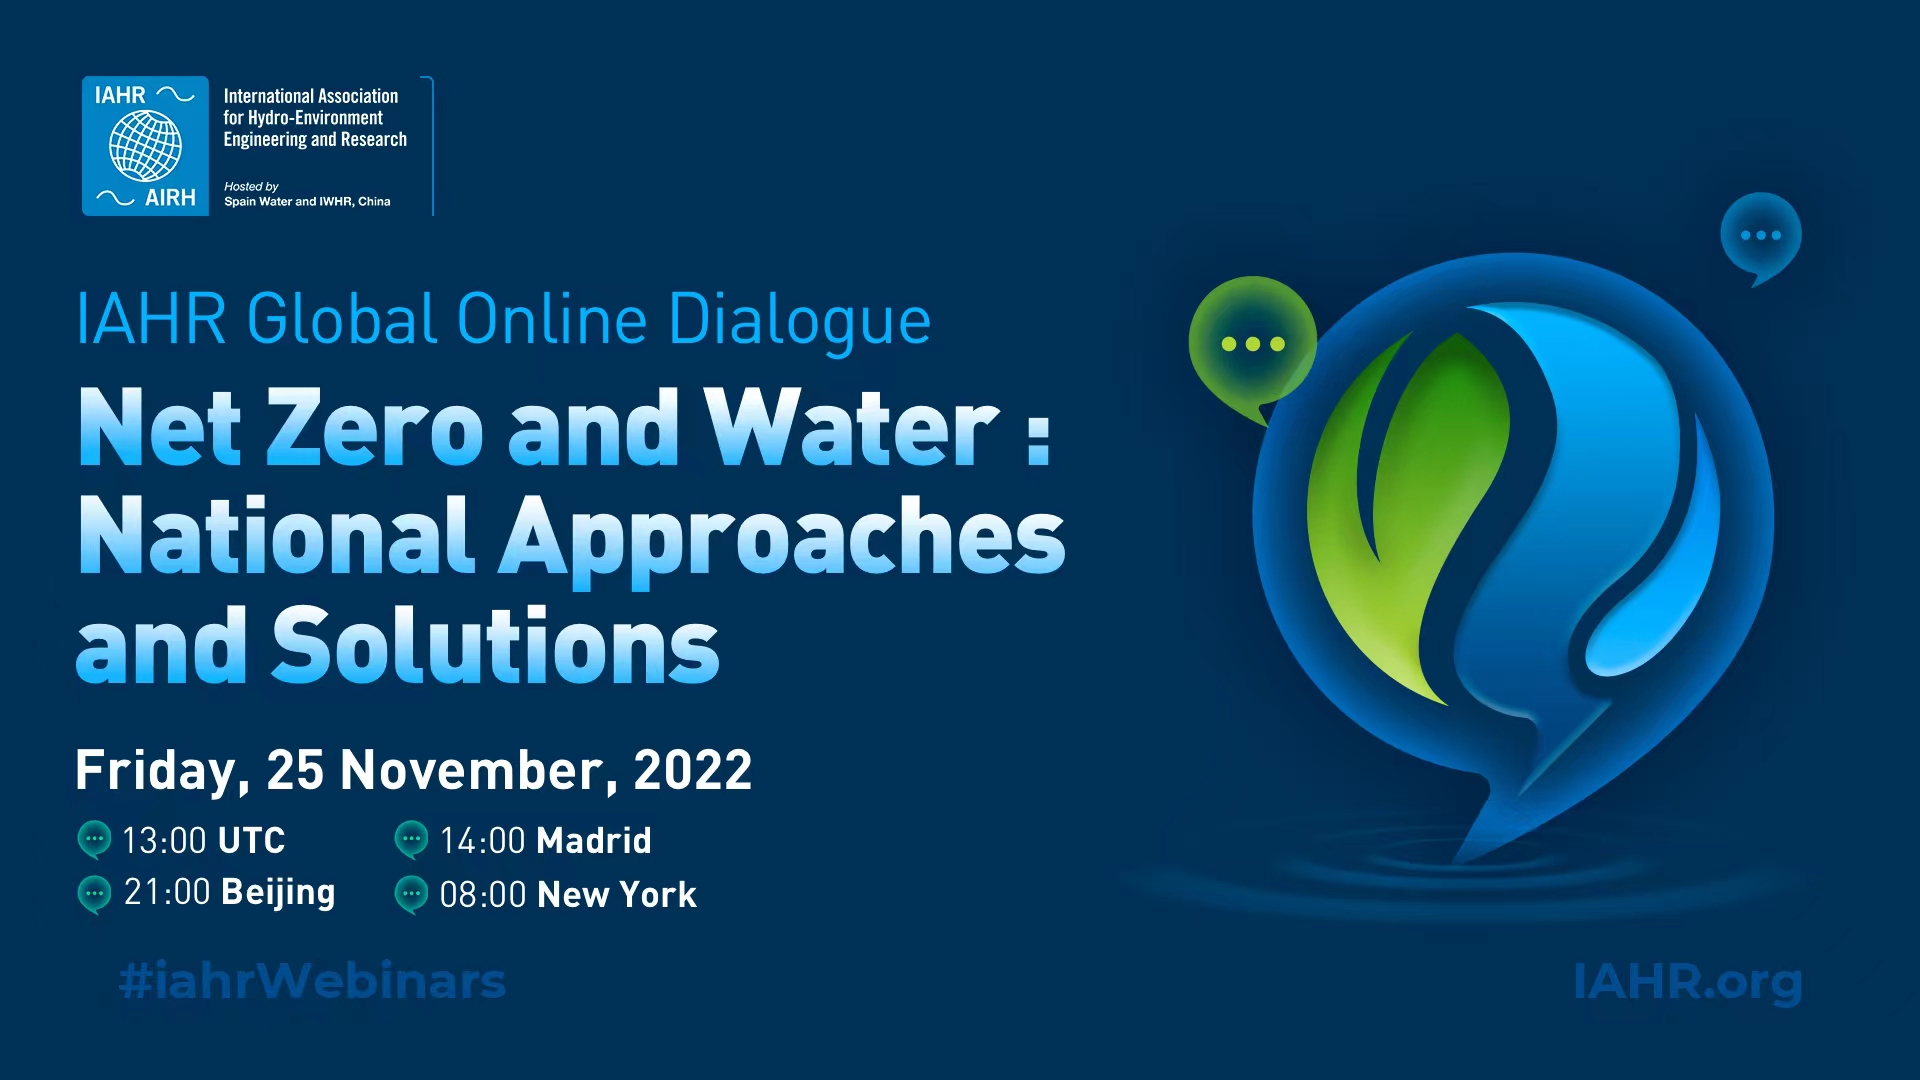 IAHR Global Online Dialogue. Net Zero and Water: National Approaches and Solutions